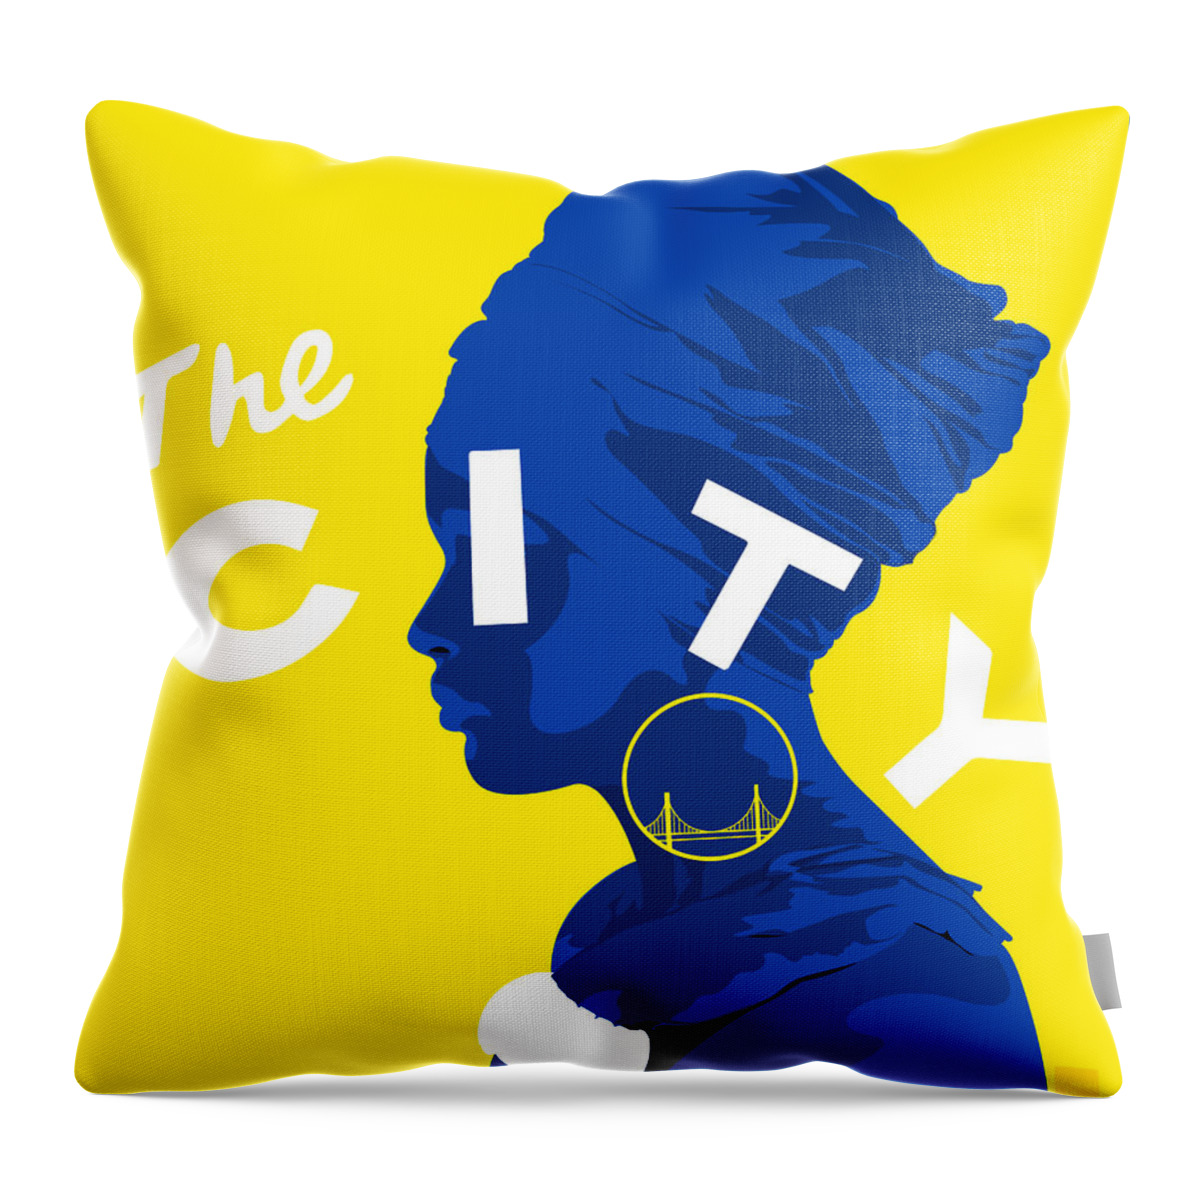 Islam Throw Pillow featuring the digital art The City by Scheme Of Things Graphics